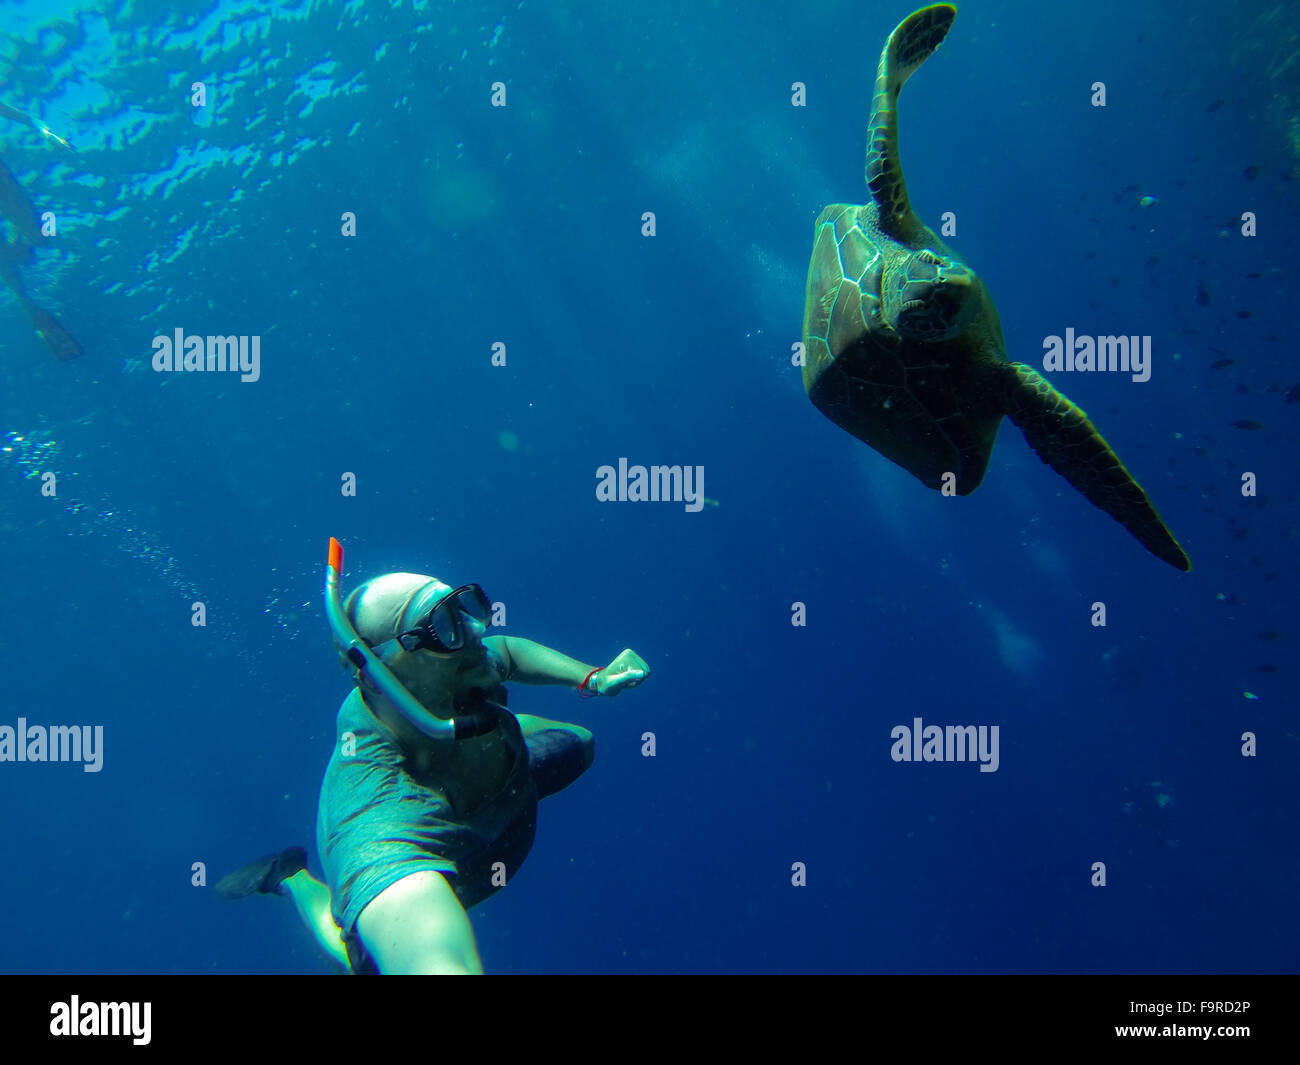 Bald Man Diving with a Seaturtle in The Deep Blue Sea Stock Photo